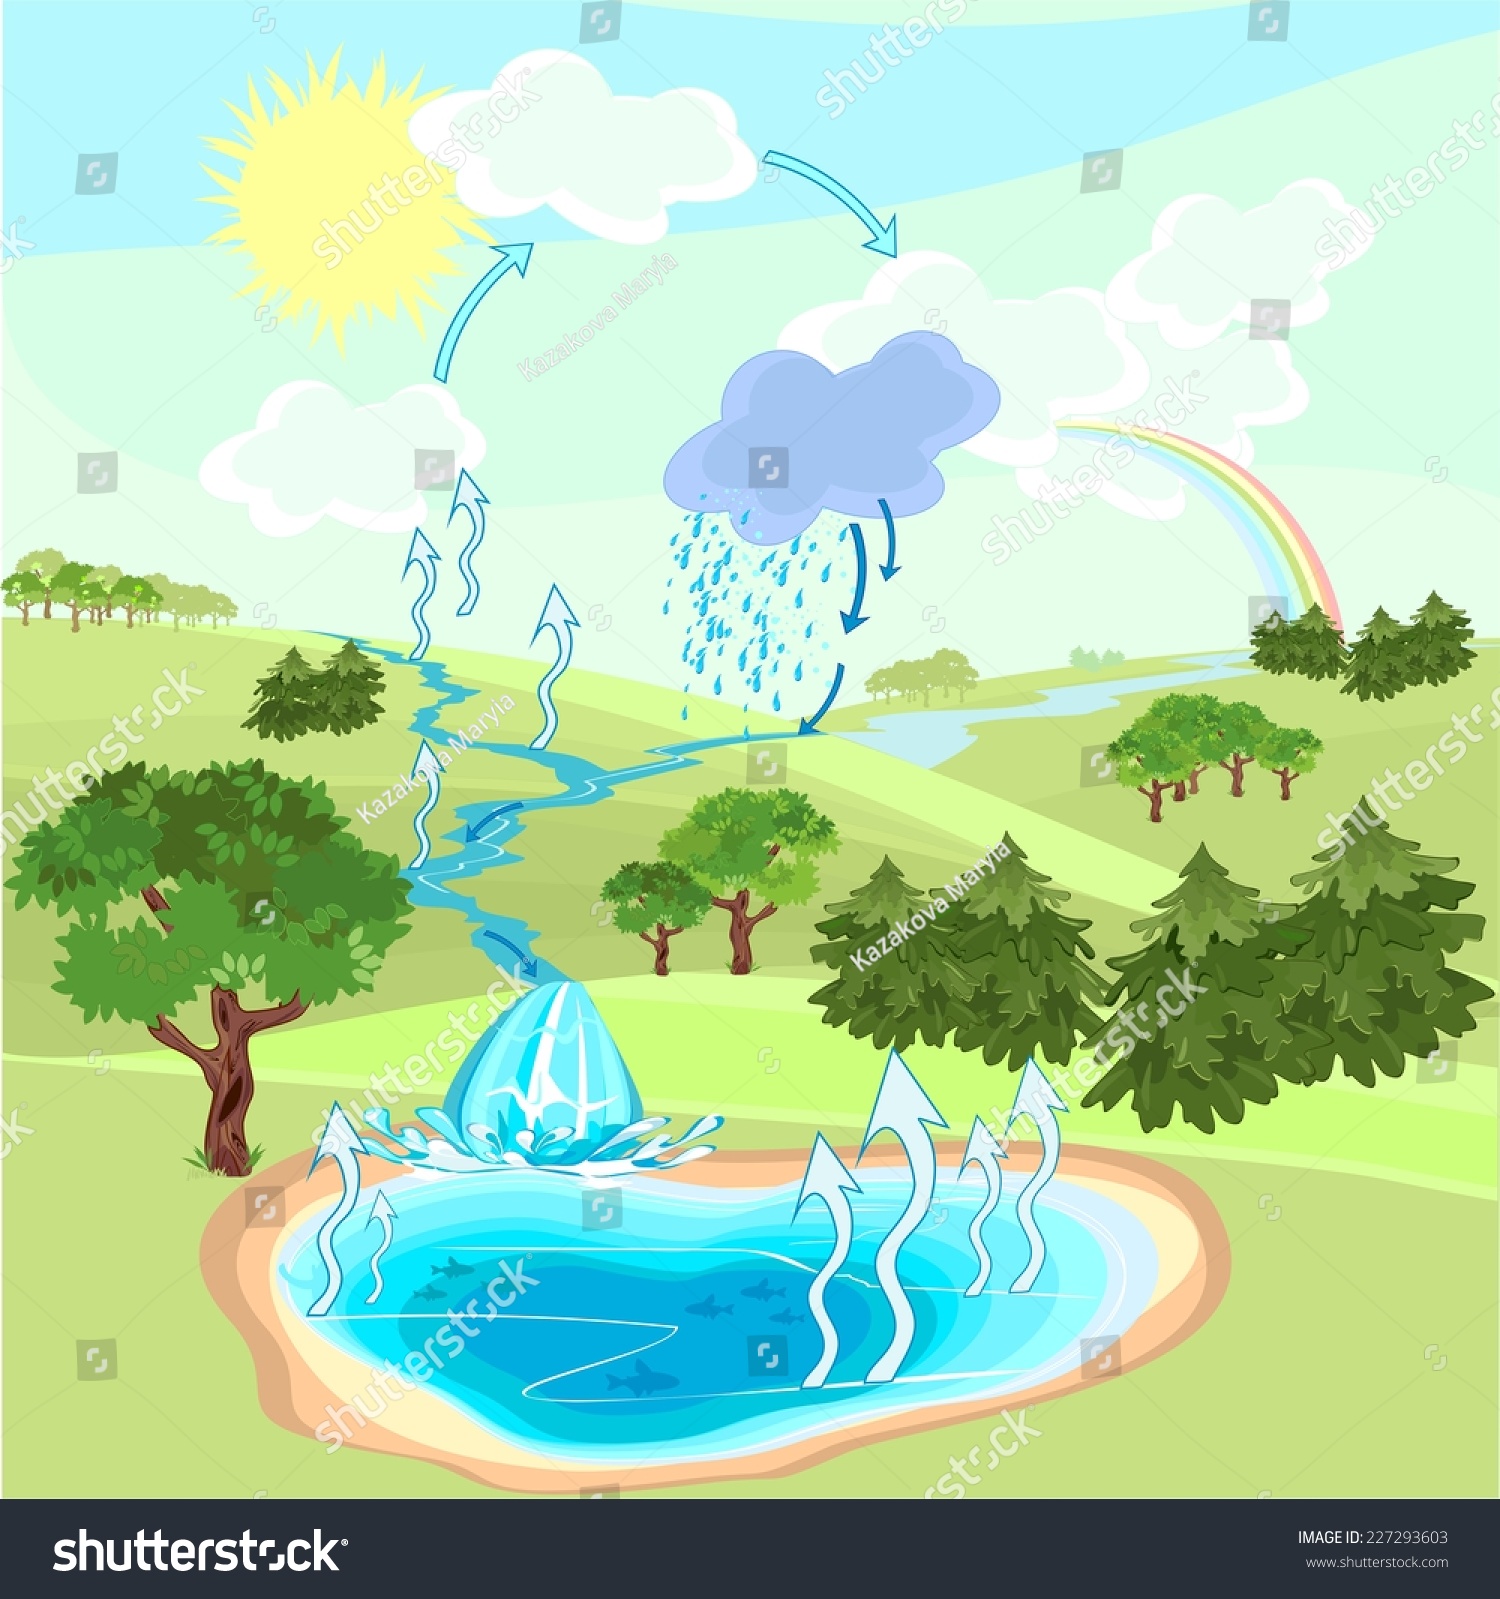 Water Cycle Nature Stock Illustration 227293603 - Shutterstock